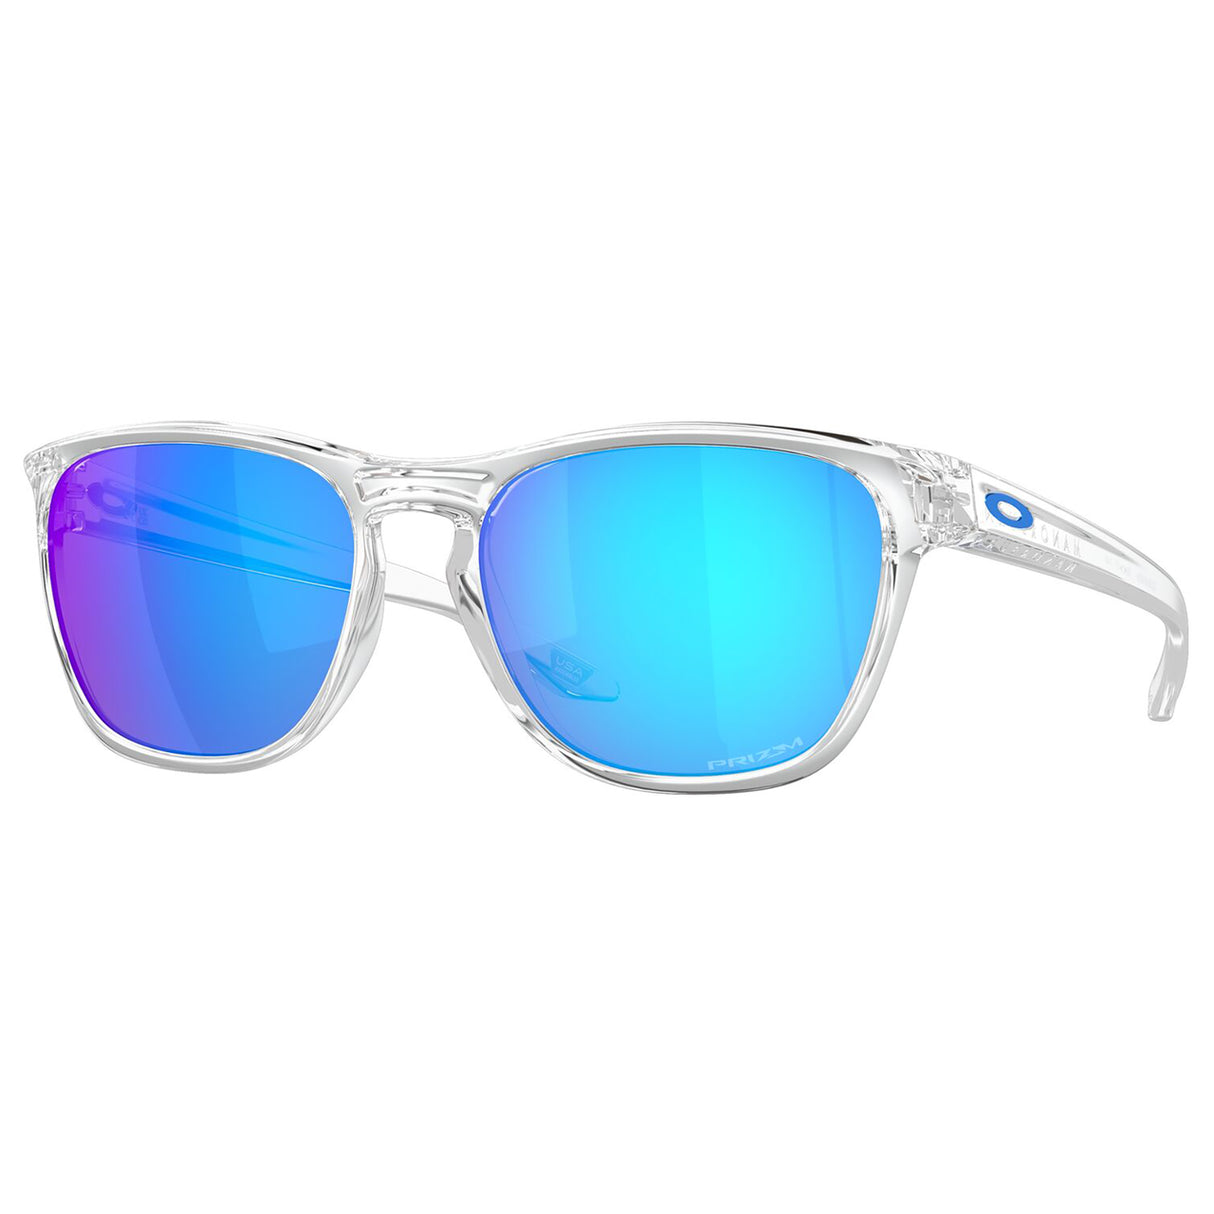 Oakley Manorburn Sunglasses (Polished Clear) Prizm Sapphire Lens